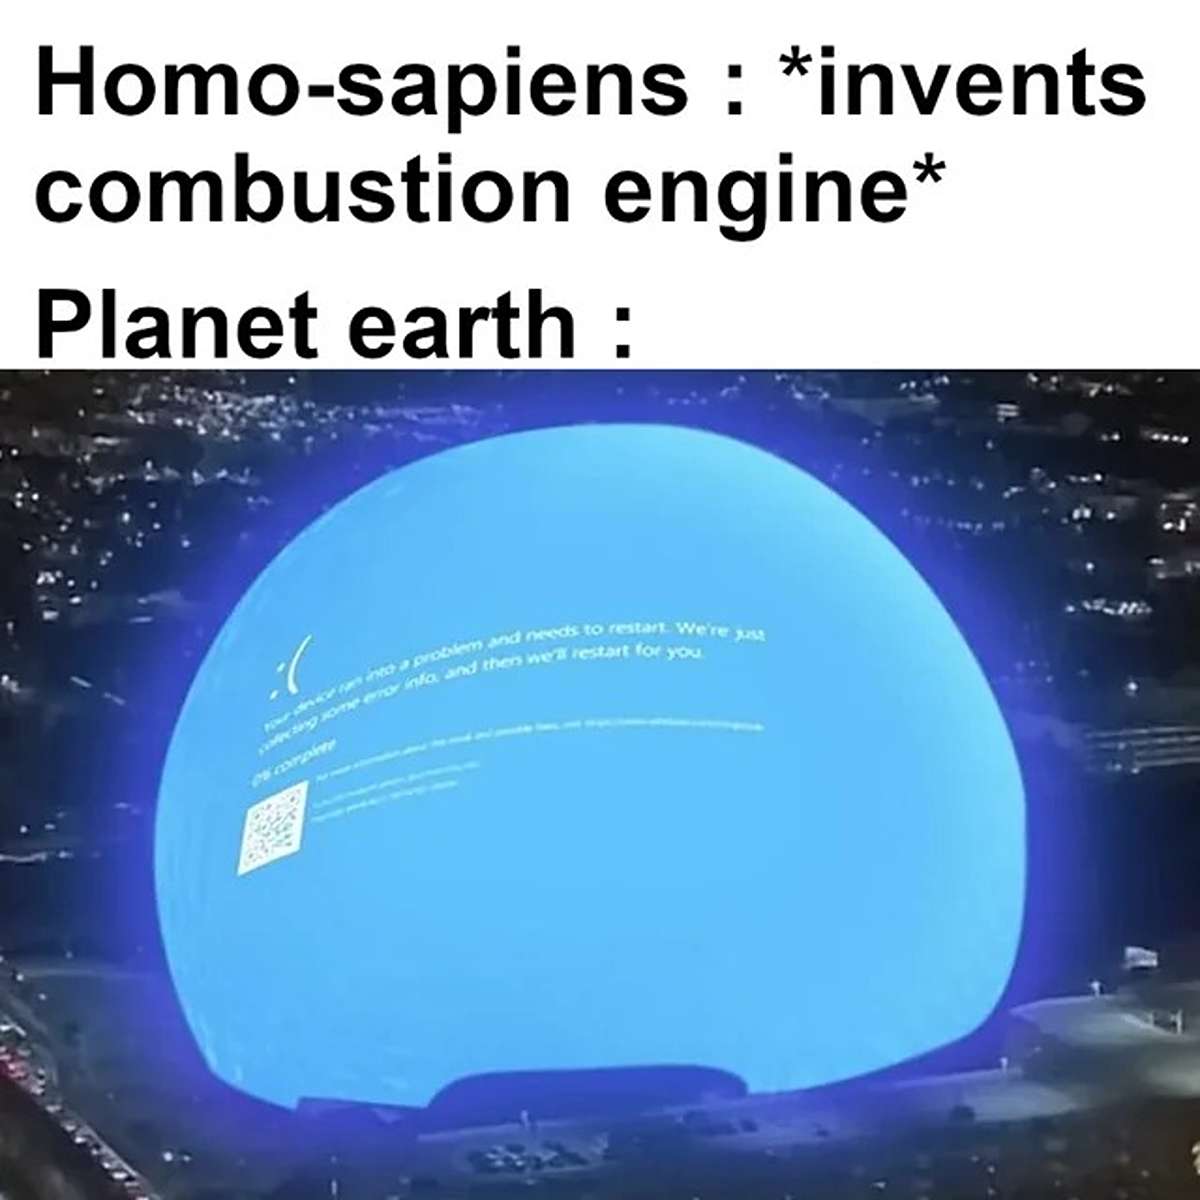 fresh memes - atmosphere - Homosapiens invents combustion engine Planet earth pecting some enor info and thens we'll restart for you your device is into a problem and needs to restart. We're just